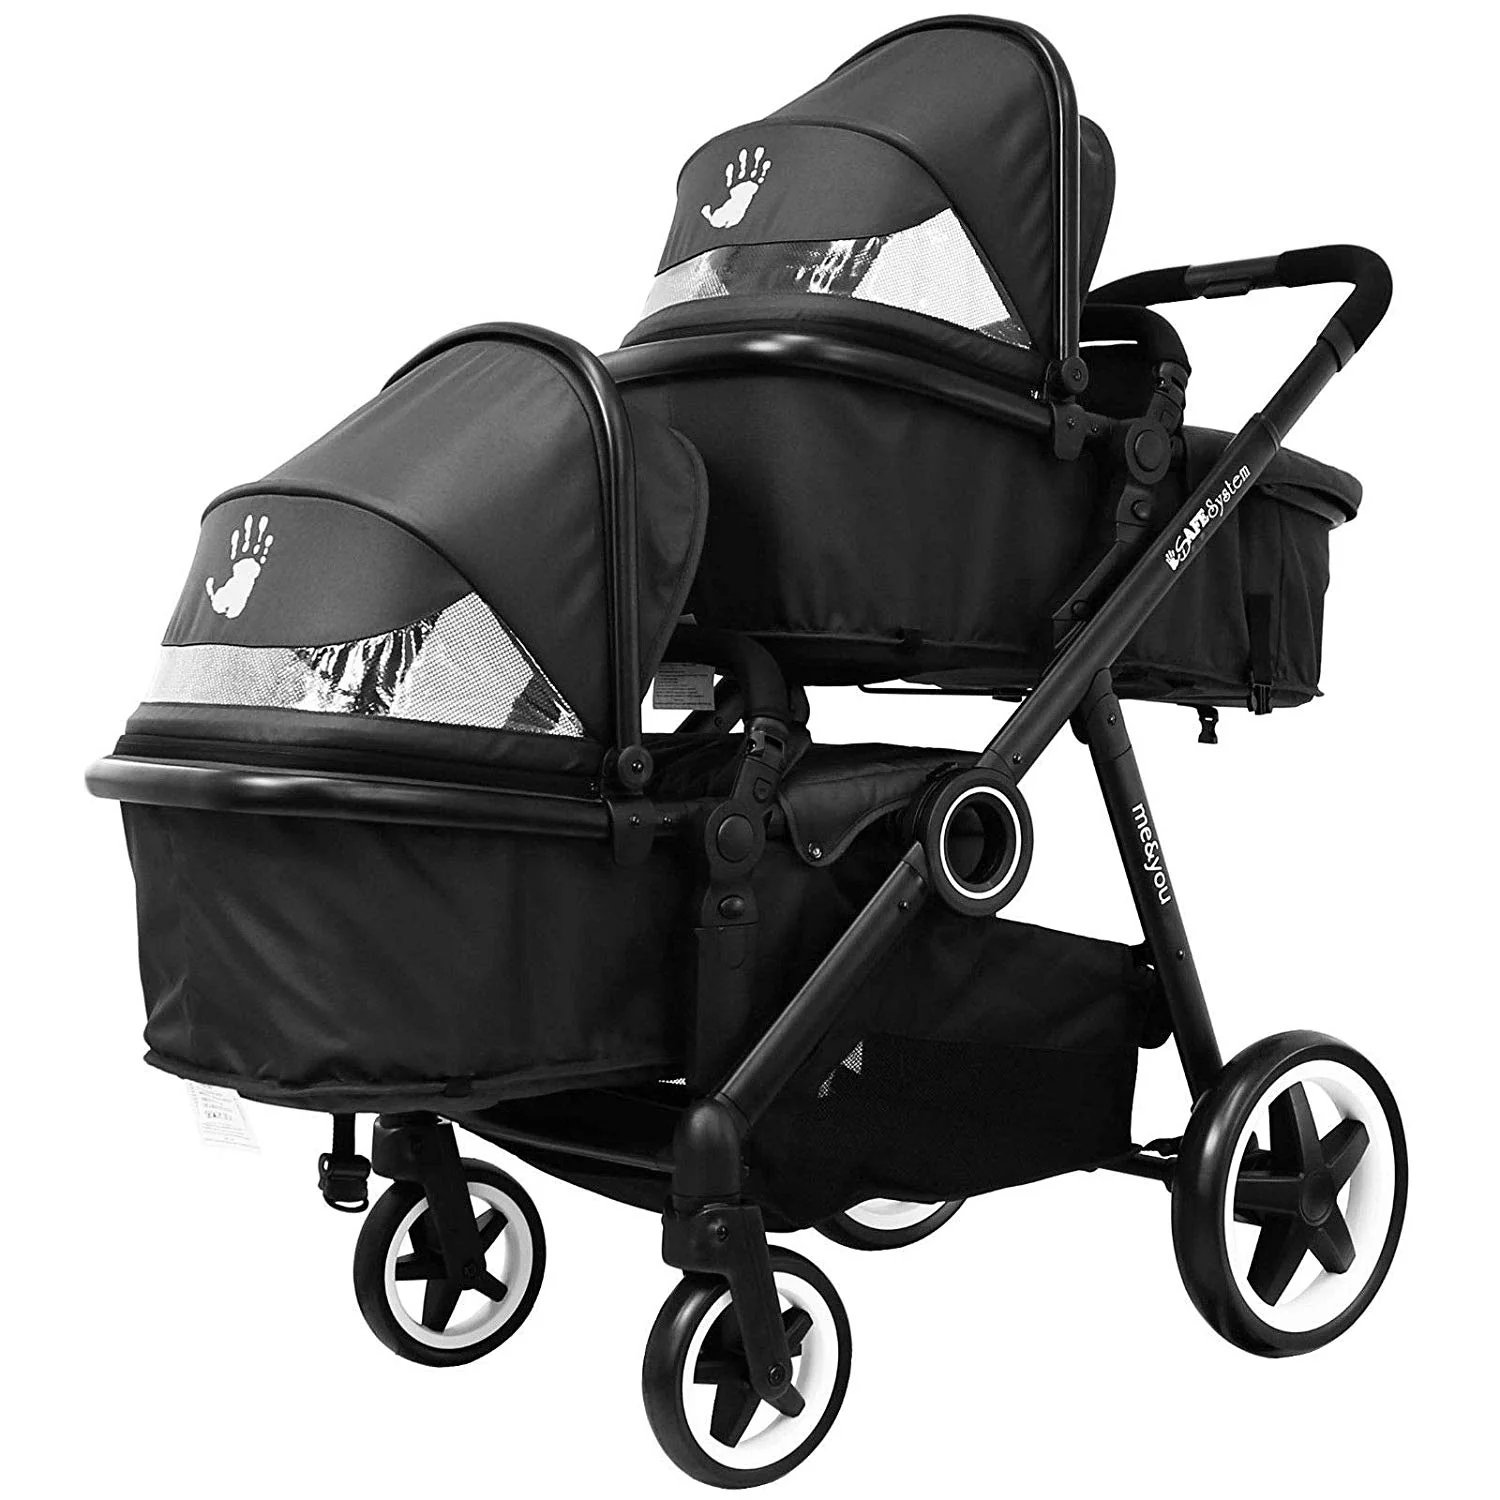 isafe double buggy